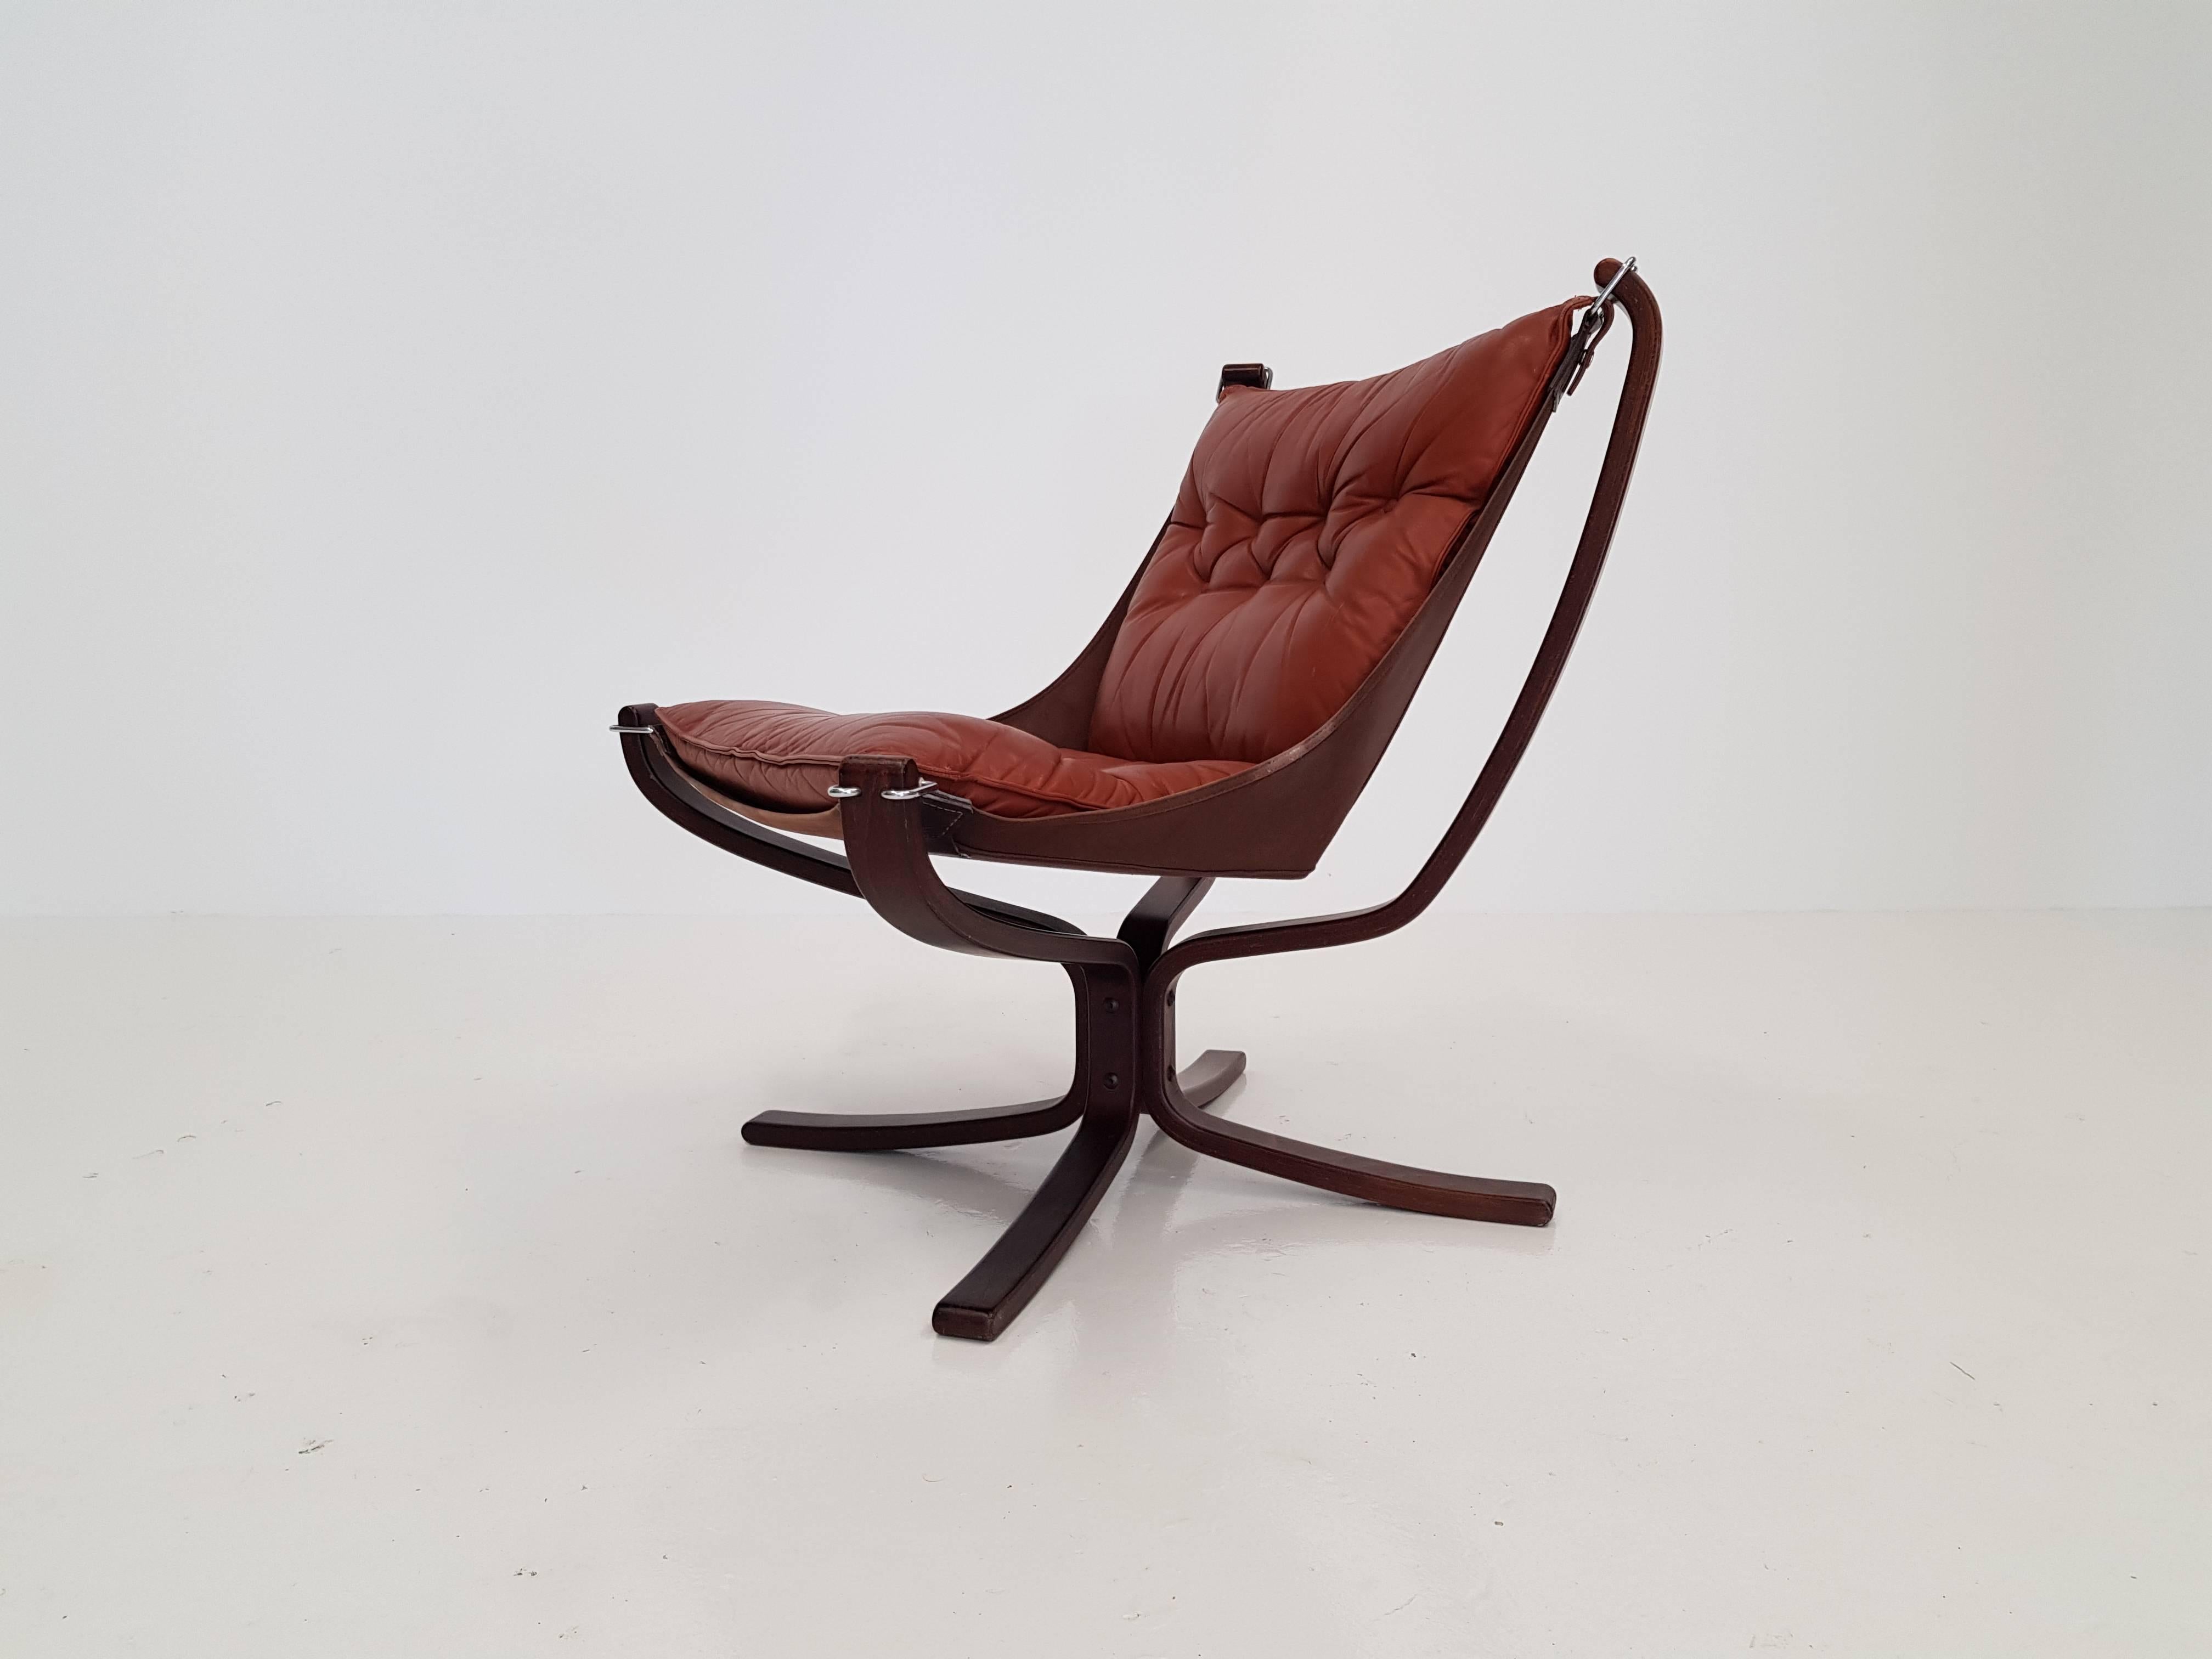 Vintage low-backed X-framed Sigurd Ressell designed Falcon chair, 1970s.

A super comfortable, amazing looking 1970s Sigurd Resell designed iconic Falcon chair. X framed with hammock design. Produced by Vatne Mobler, Norway.
   